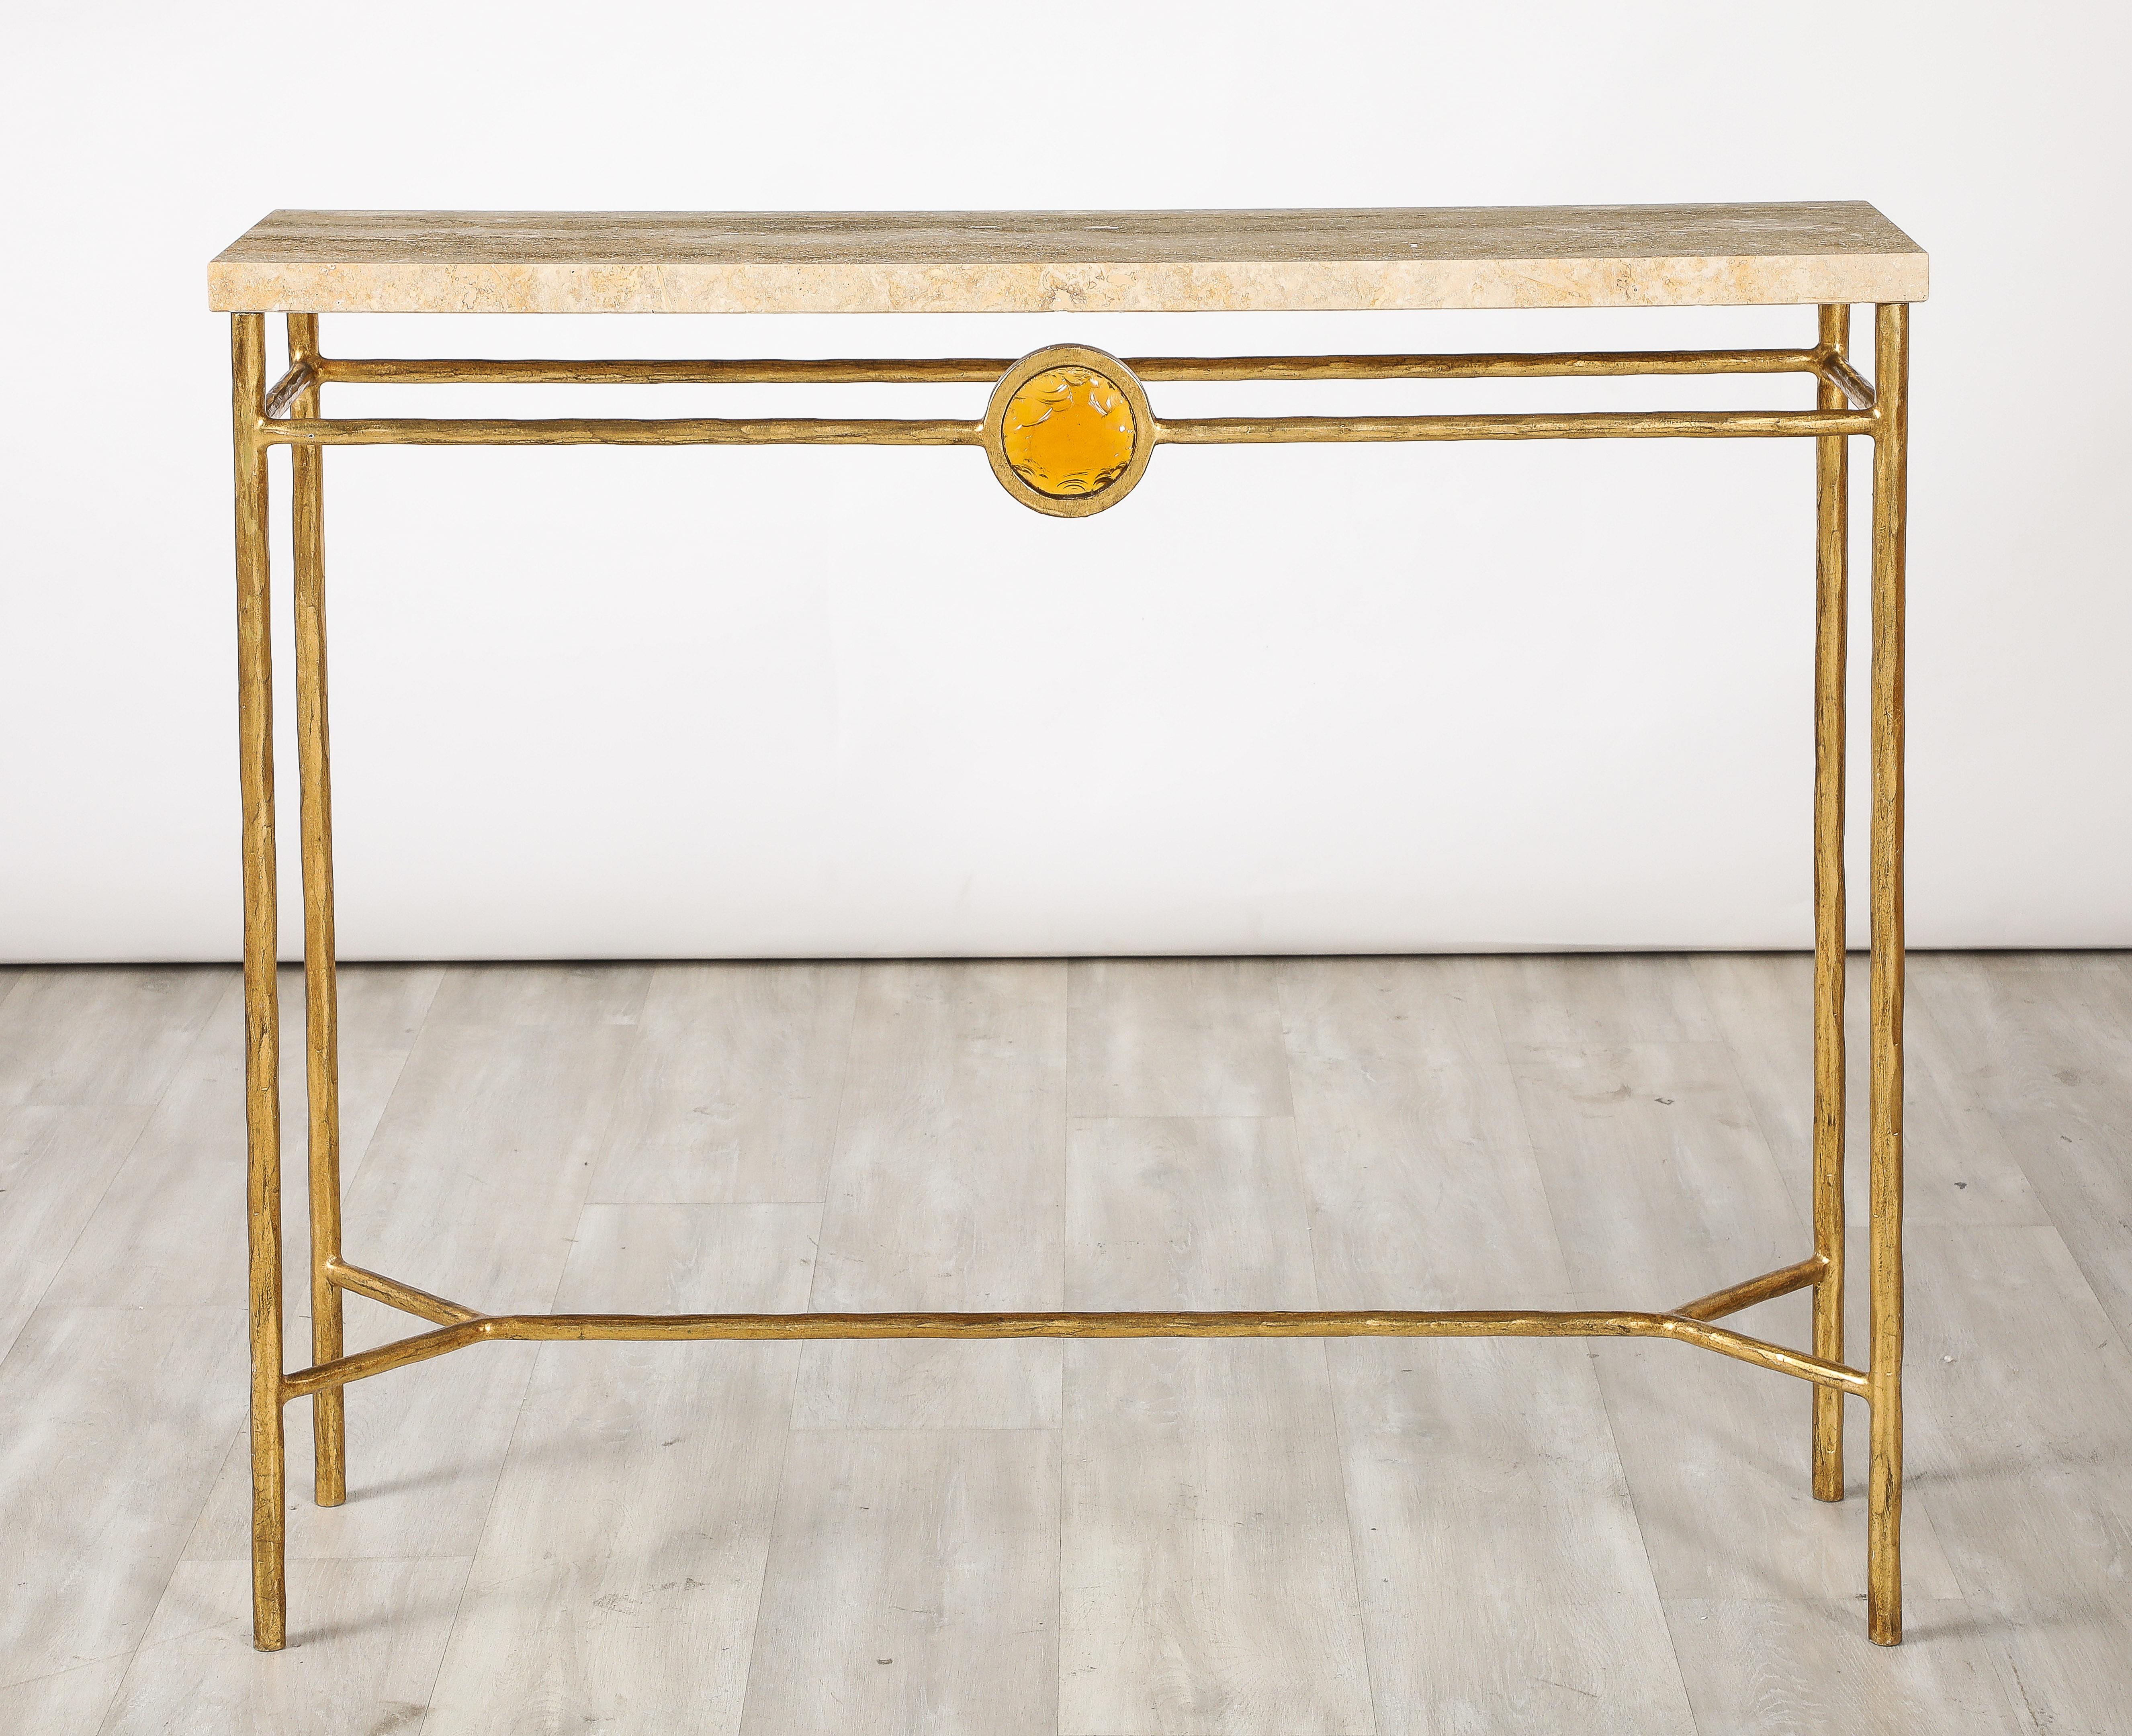 A stunning pair of Italian gilt iron console tables with travertine tops, of very simple and sleek form with straight legs and stretcher. A wonderful citrine colored glass decorative element centers the gilt iron apron. An elegant and interesting